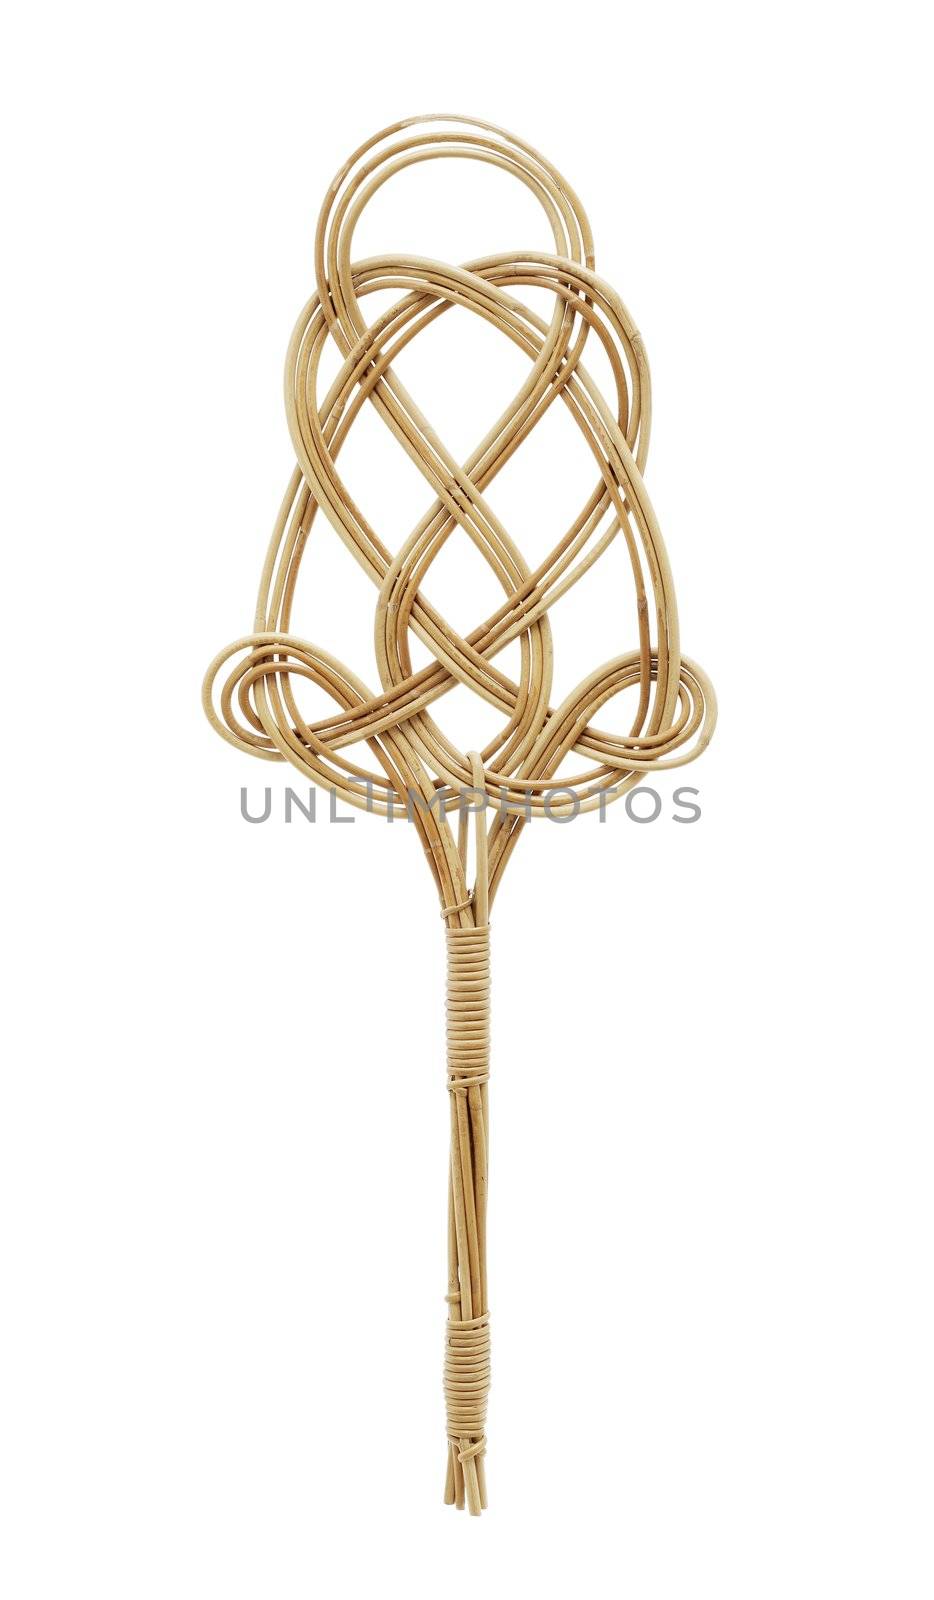 Carpet beater by Stocksnapper